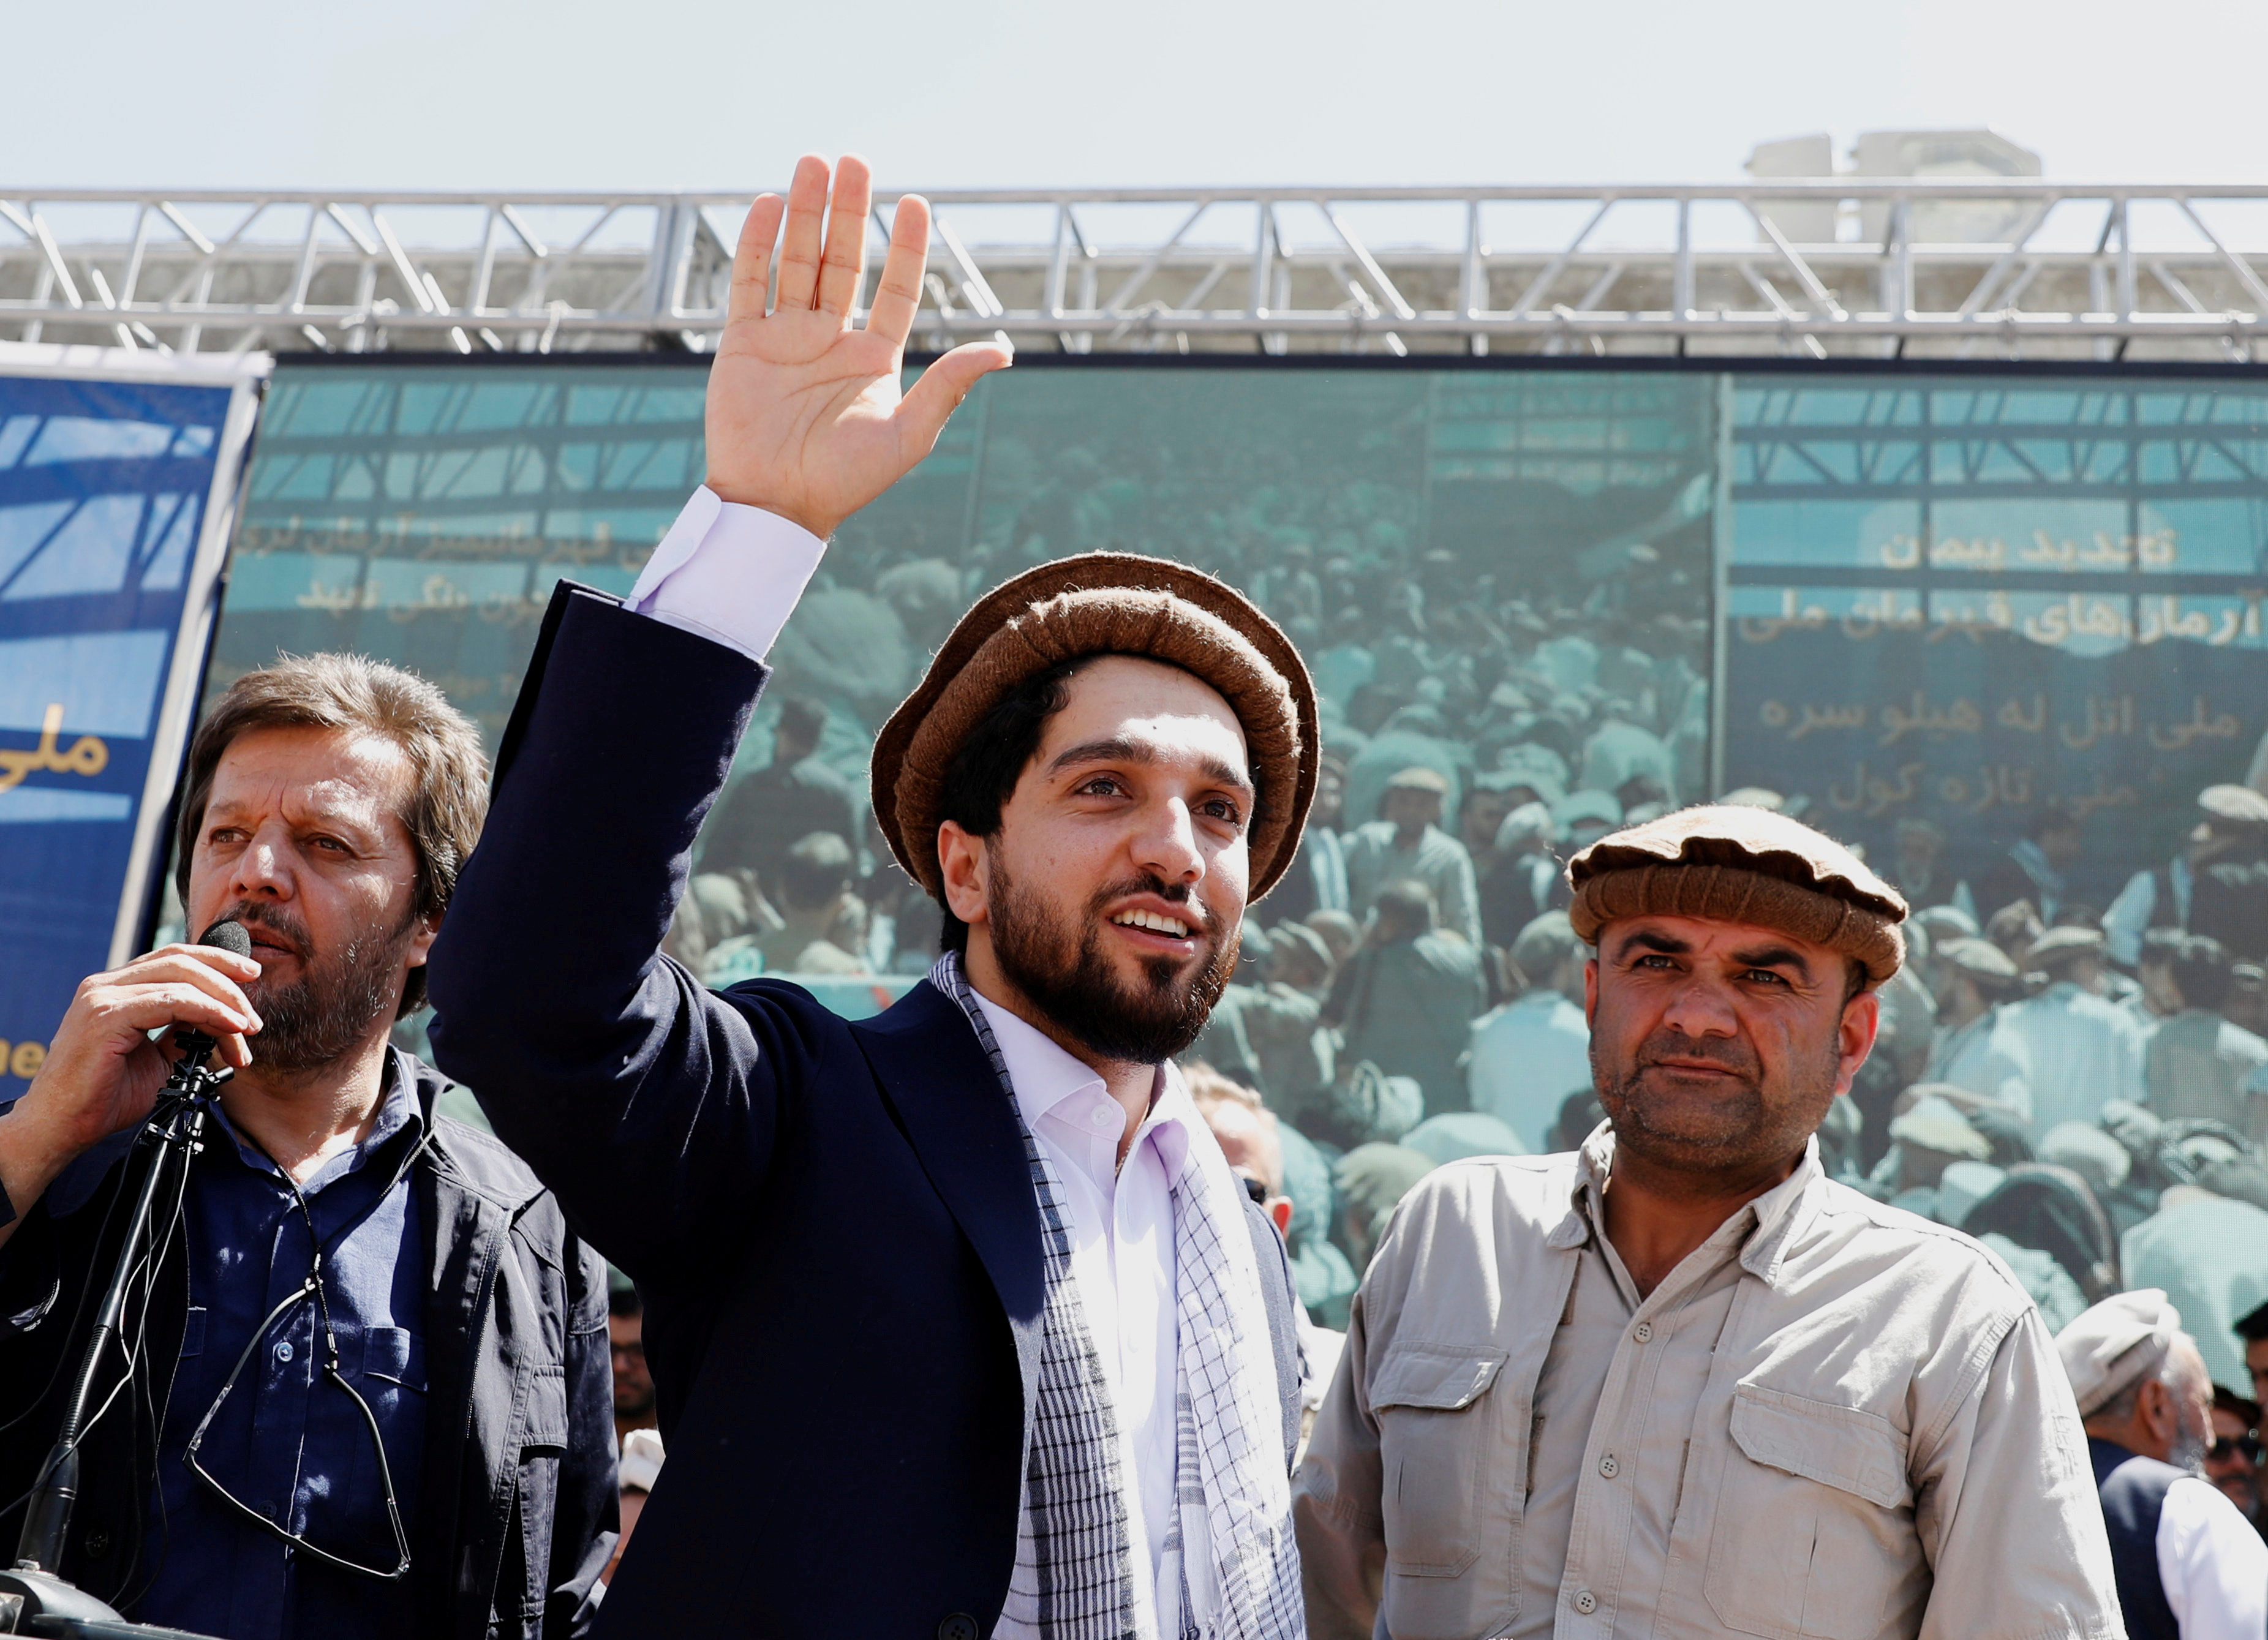 Ahmad Massoud, son of the slain hero of the anti-Soviet resistance Ahmad Shah Massoud, waves as he arrives to attend a new political movement in Bazarak